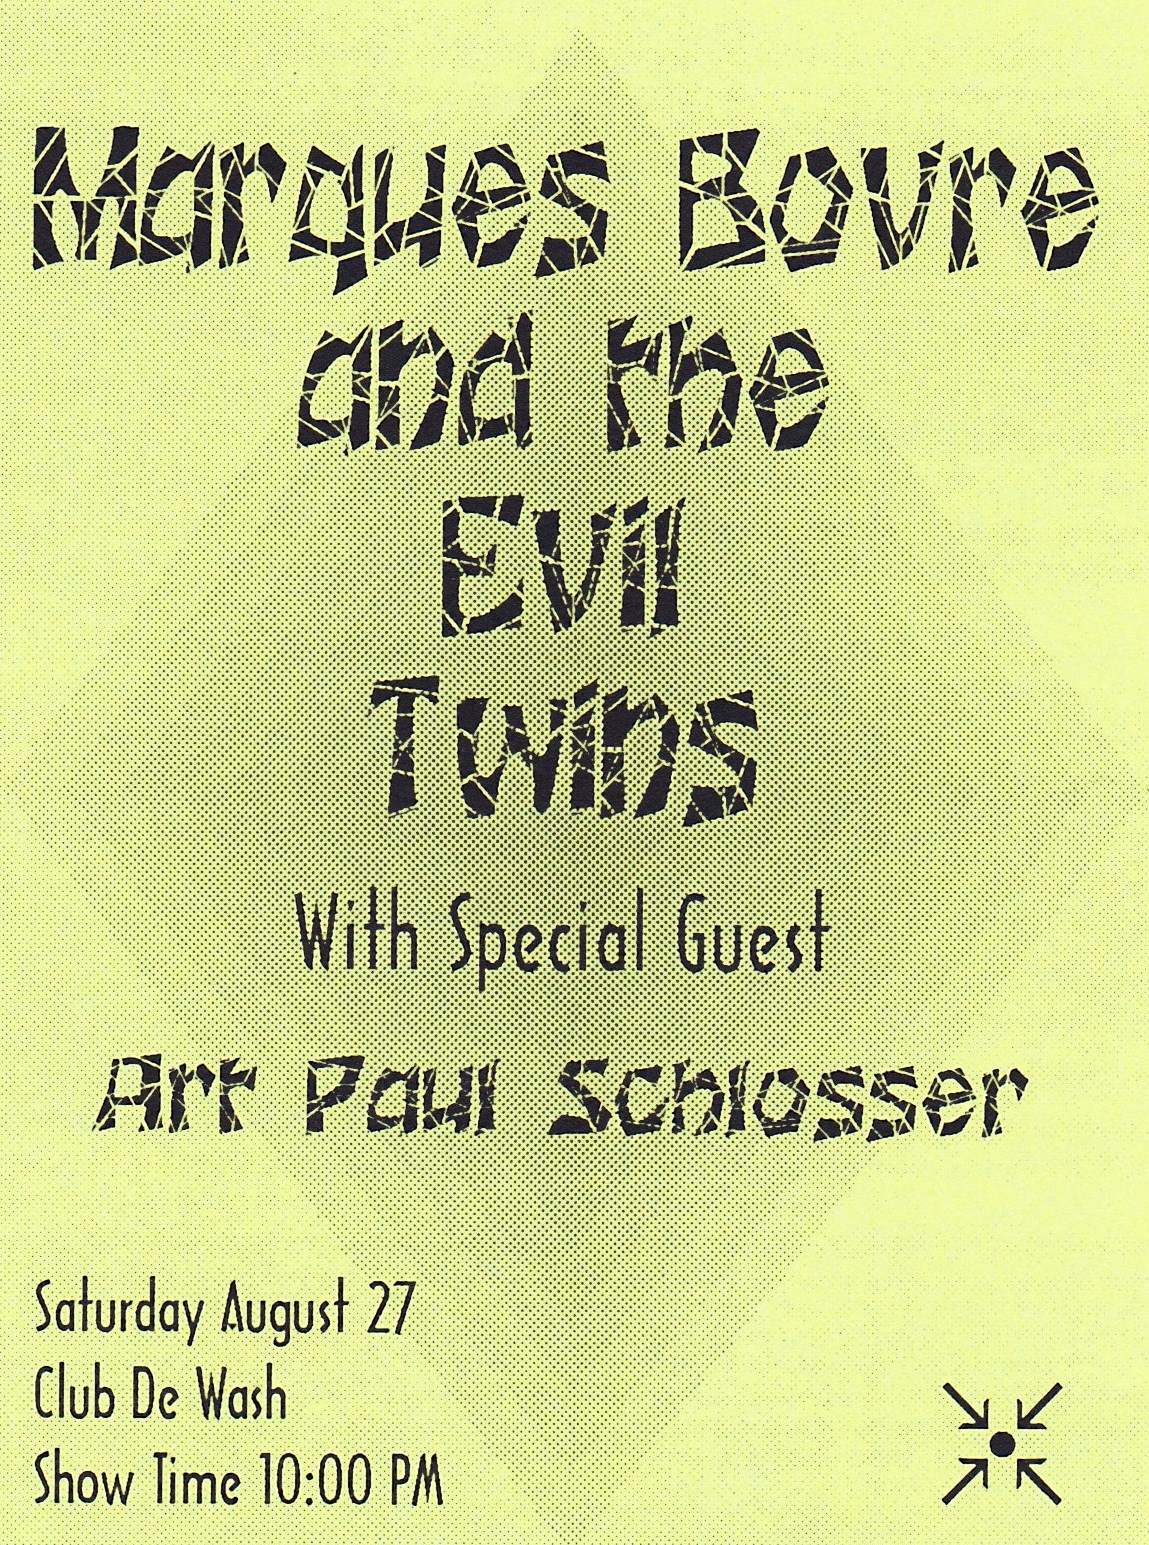 Marques Bovre and the Evil Twins, August 27, 1994